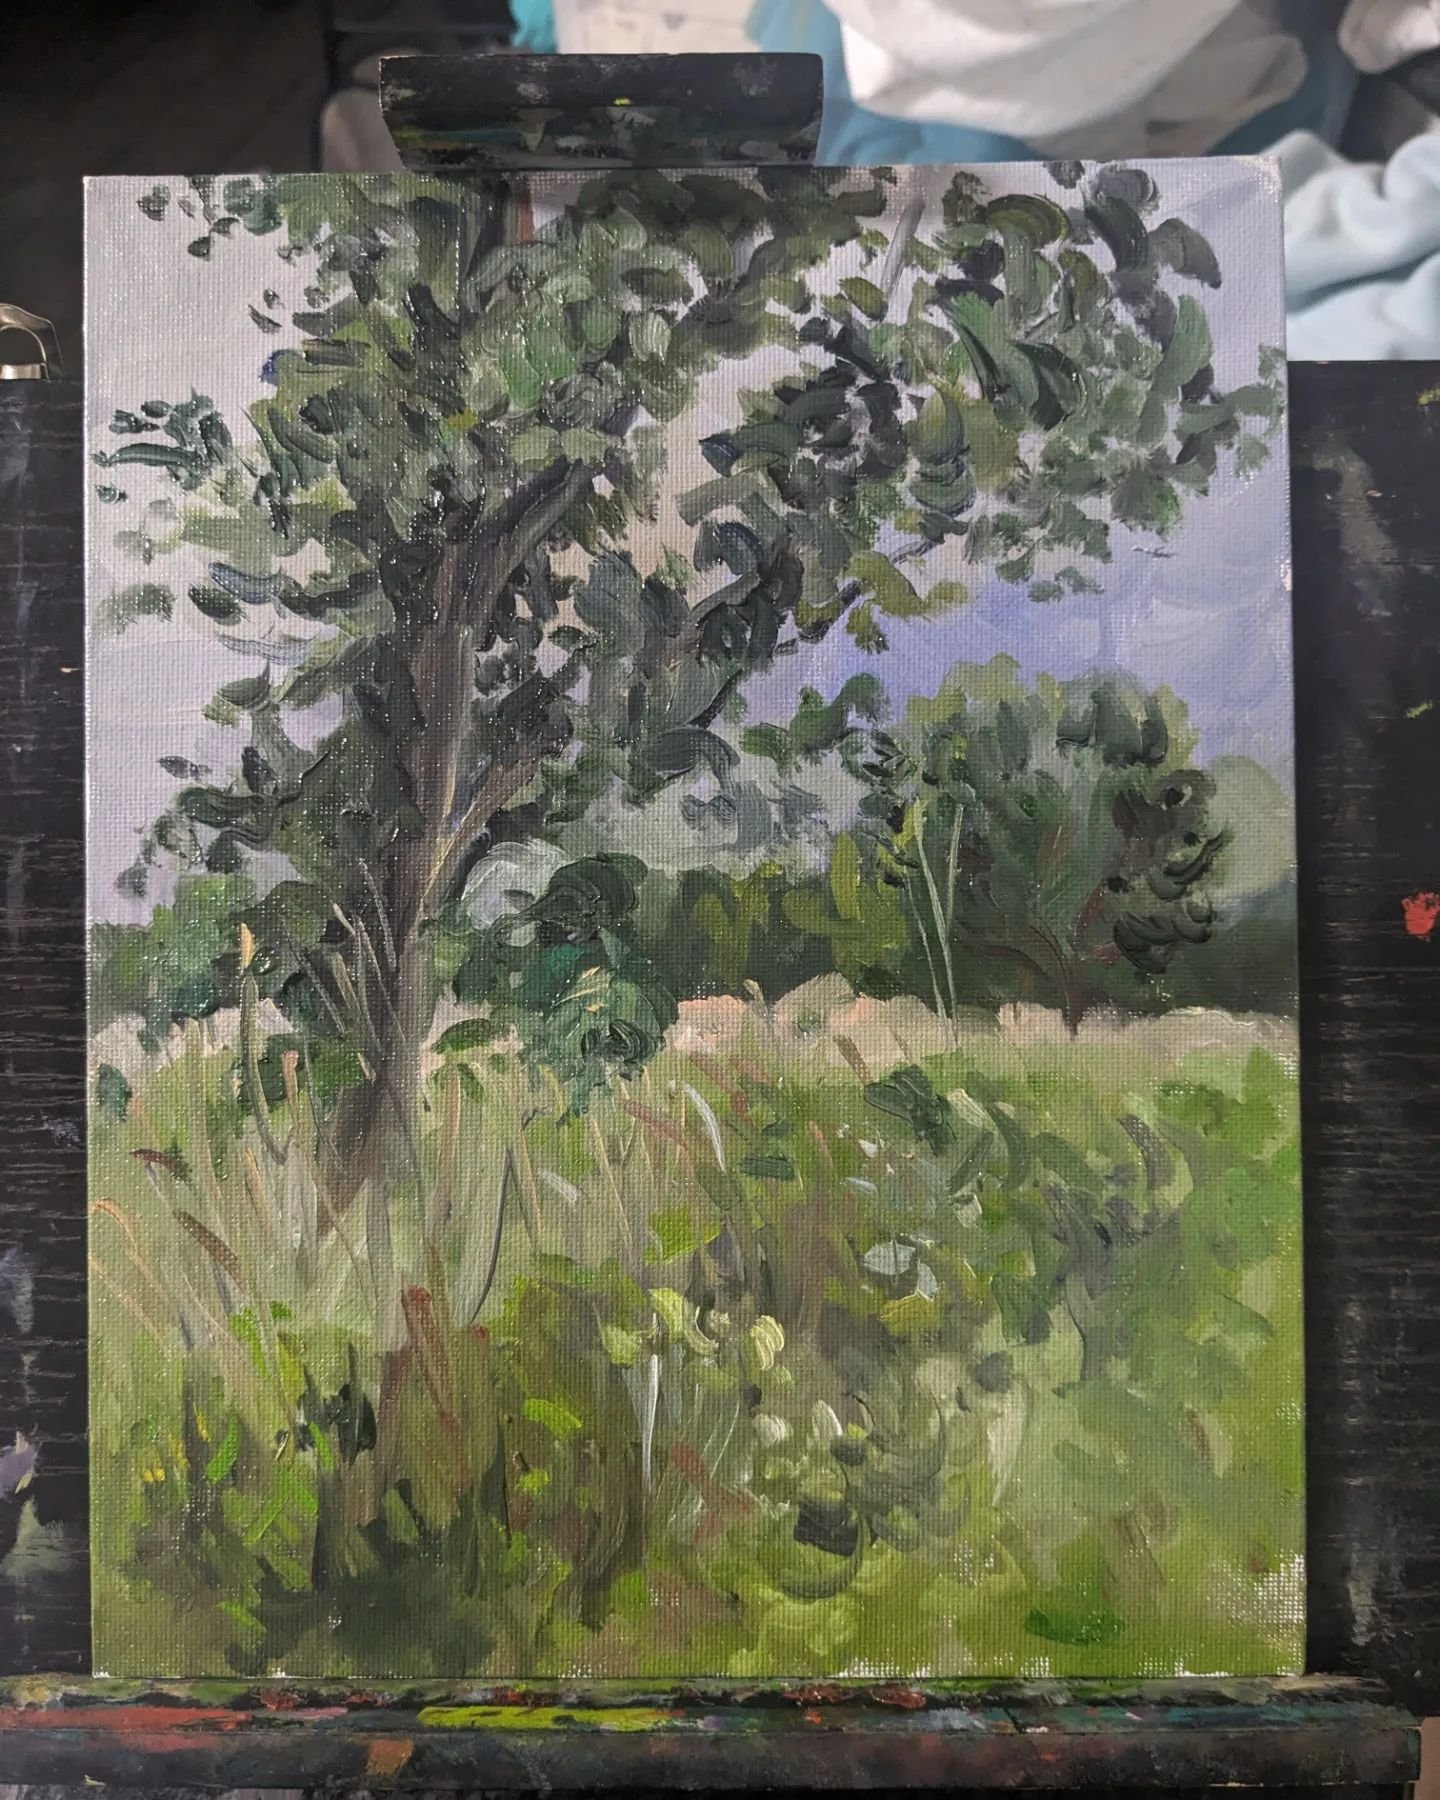 Plein air study from last Friday... I actually did it as the oncoming rain was bearing down on me and starting to sprinkle. Maybe it helped that I was working in oils, instead of acrylics or watercolor?? 

ANYWAY. Swipe to see the studio version I'm 